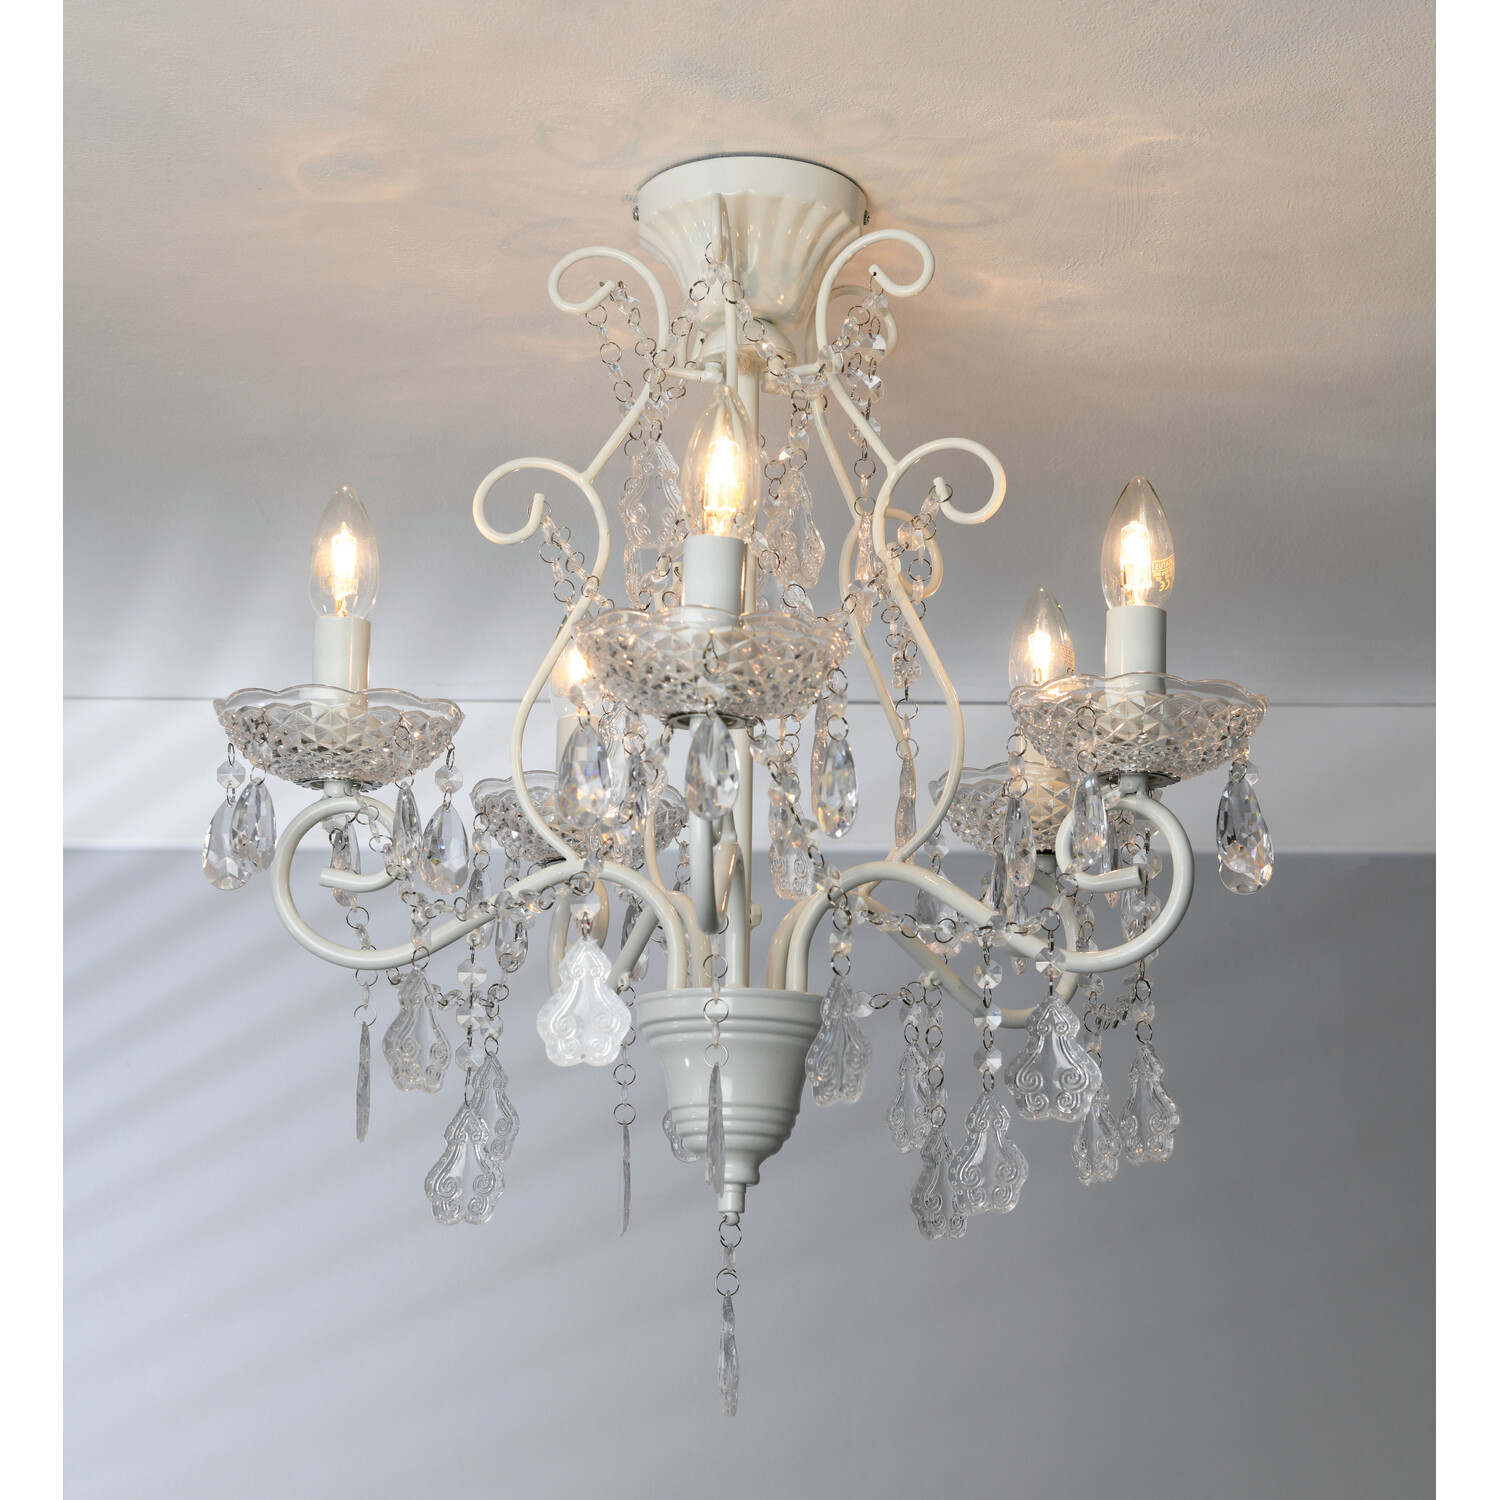 White Antiqued Jewelled Ceiling Chandelier Image 3